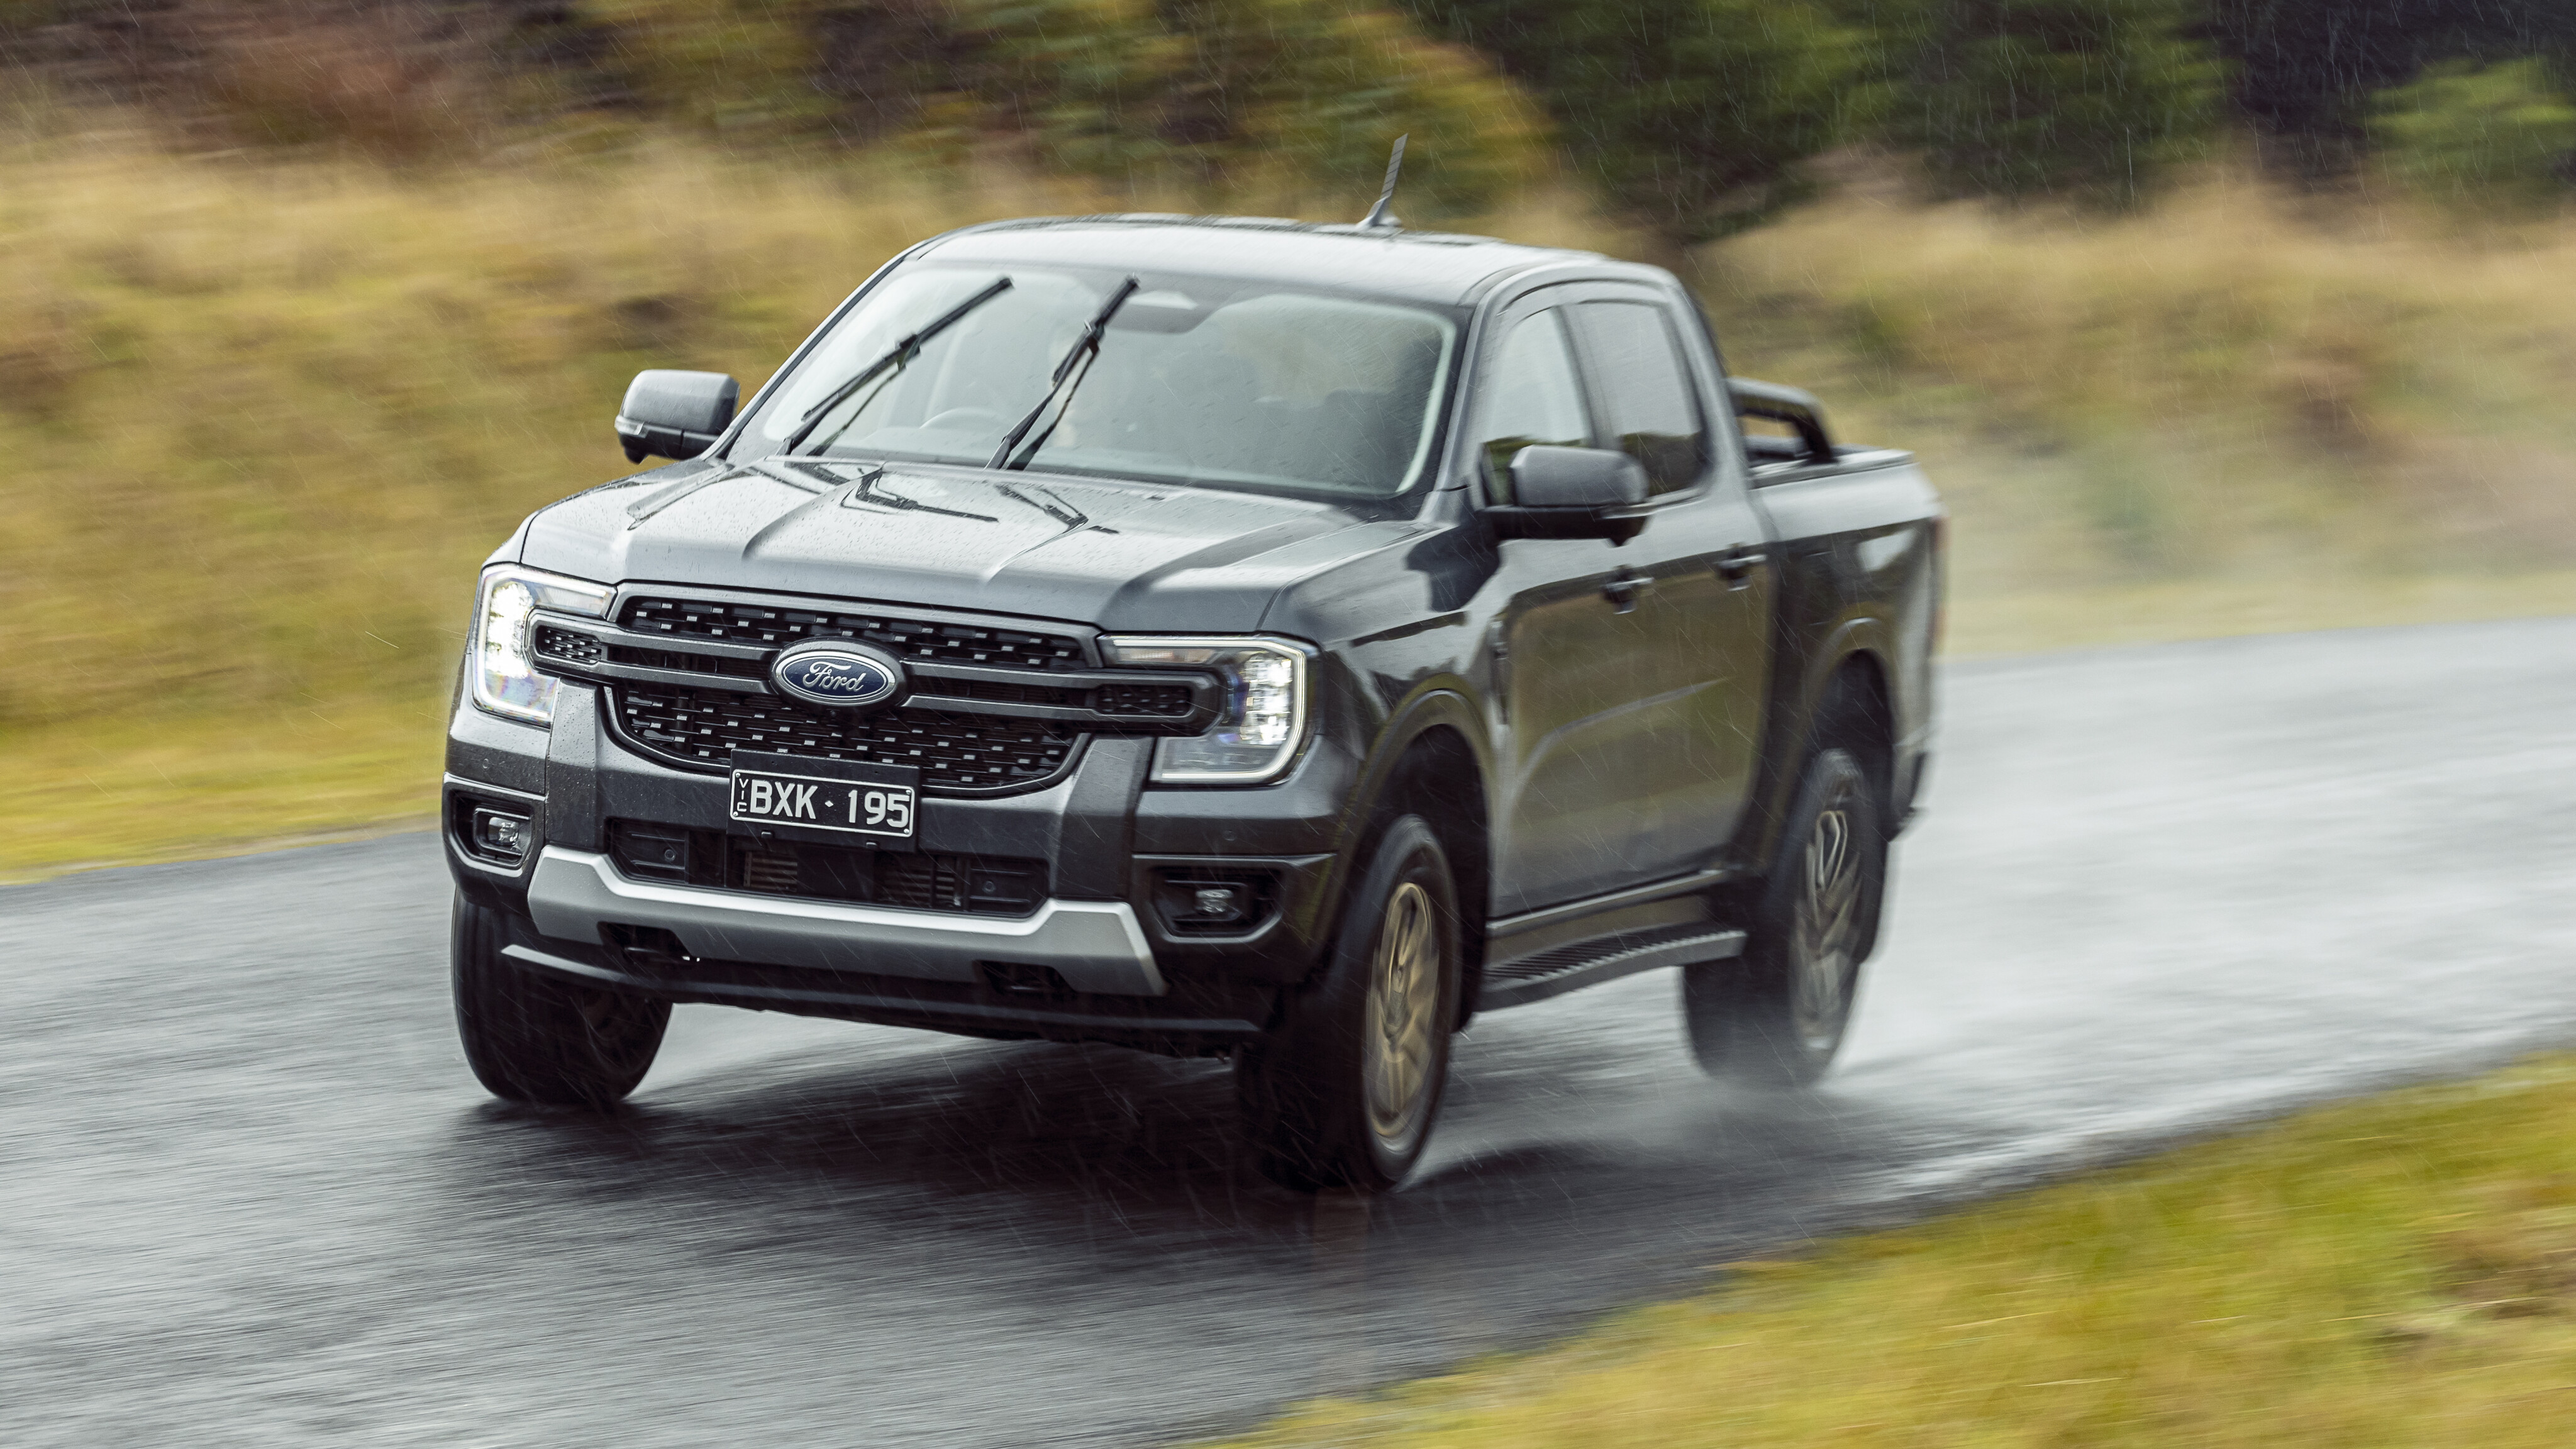 2023 Ford Ranger Wildtrak, Price Review, 3.0 V6, Cost Of Ownership, Practicality, Features